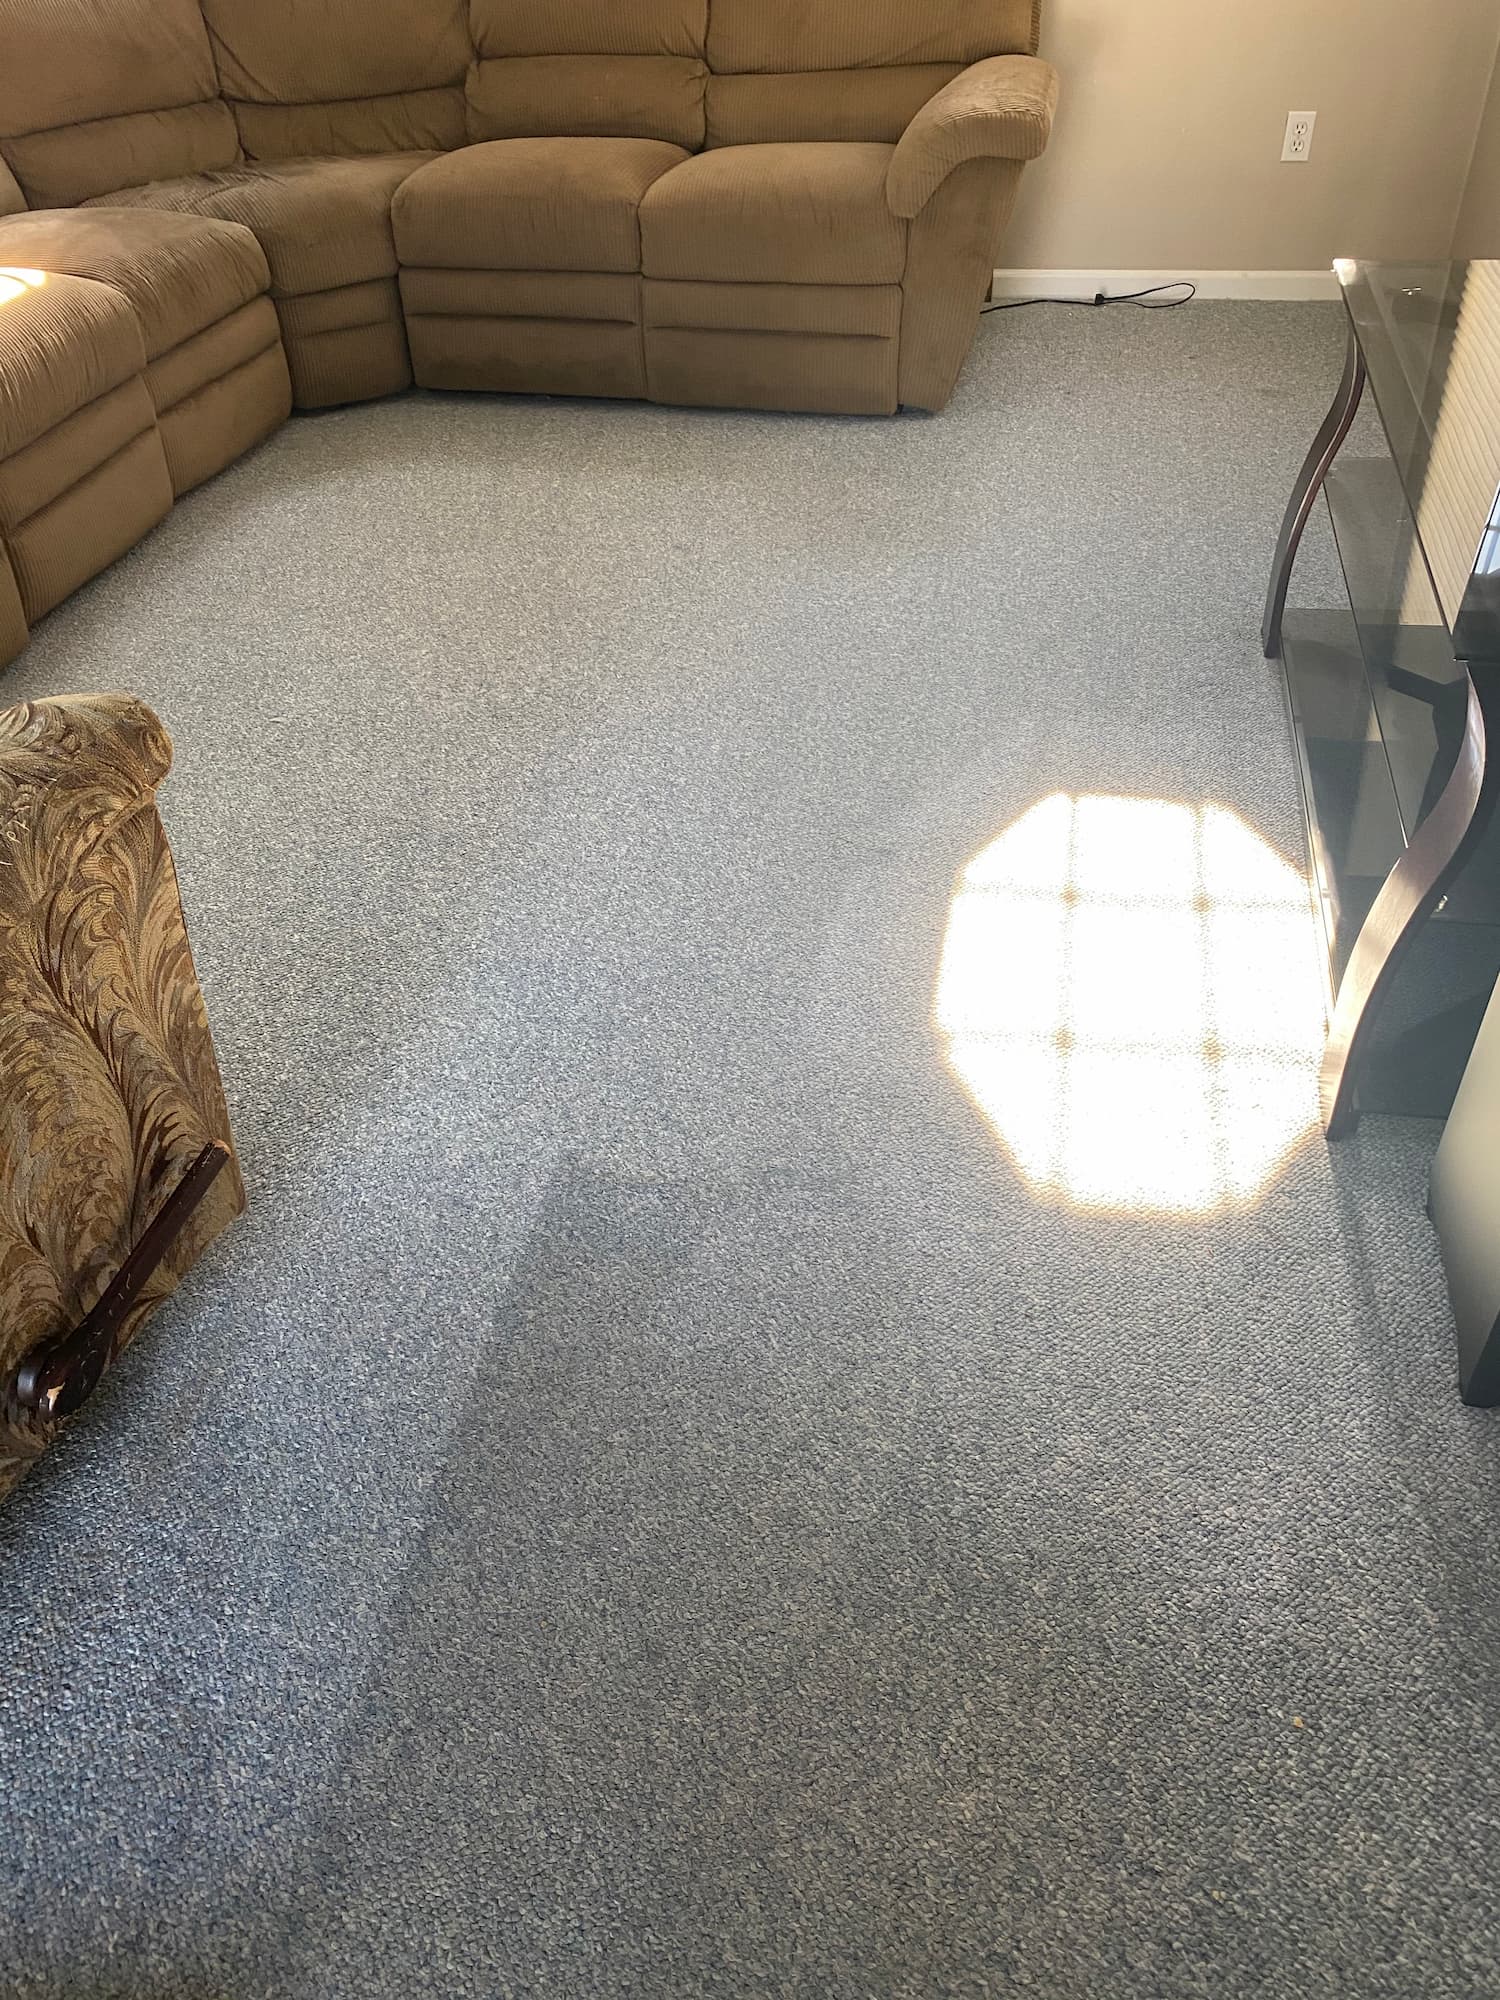 Berber carpet cleaning baden pa cover